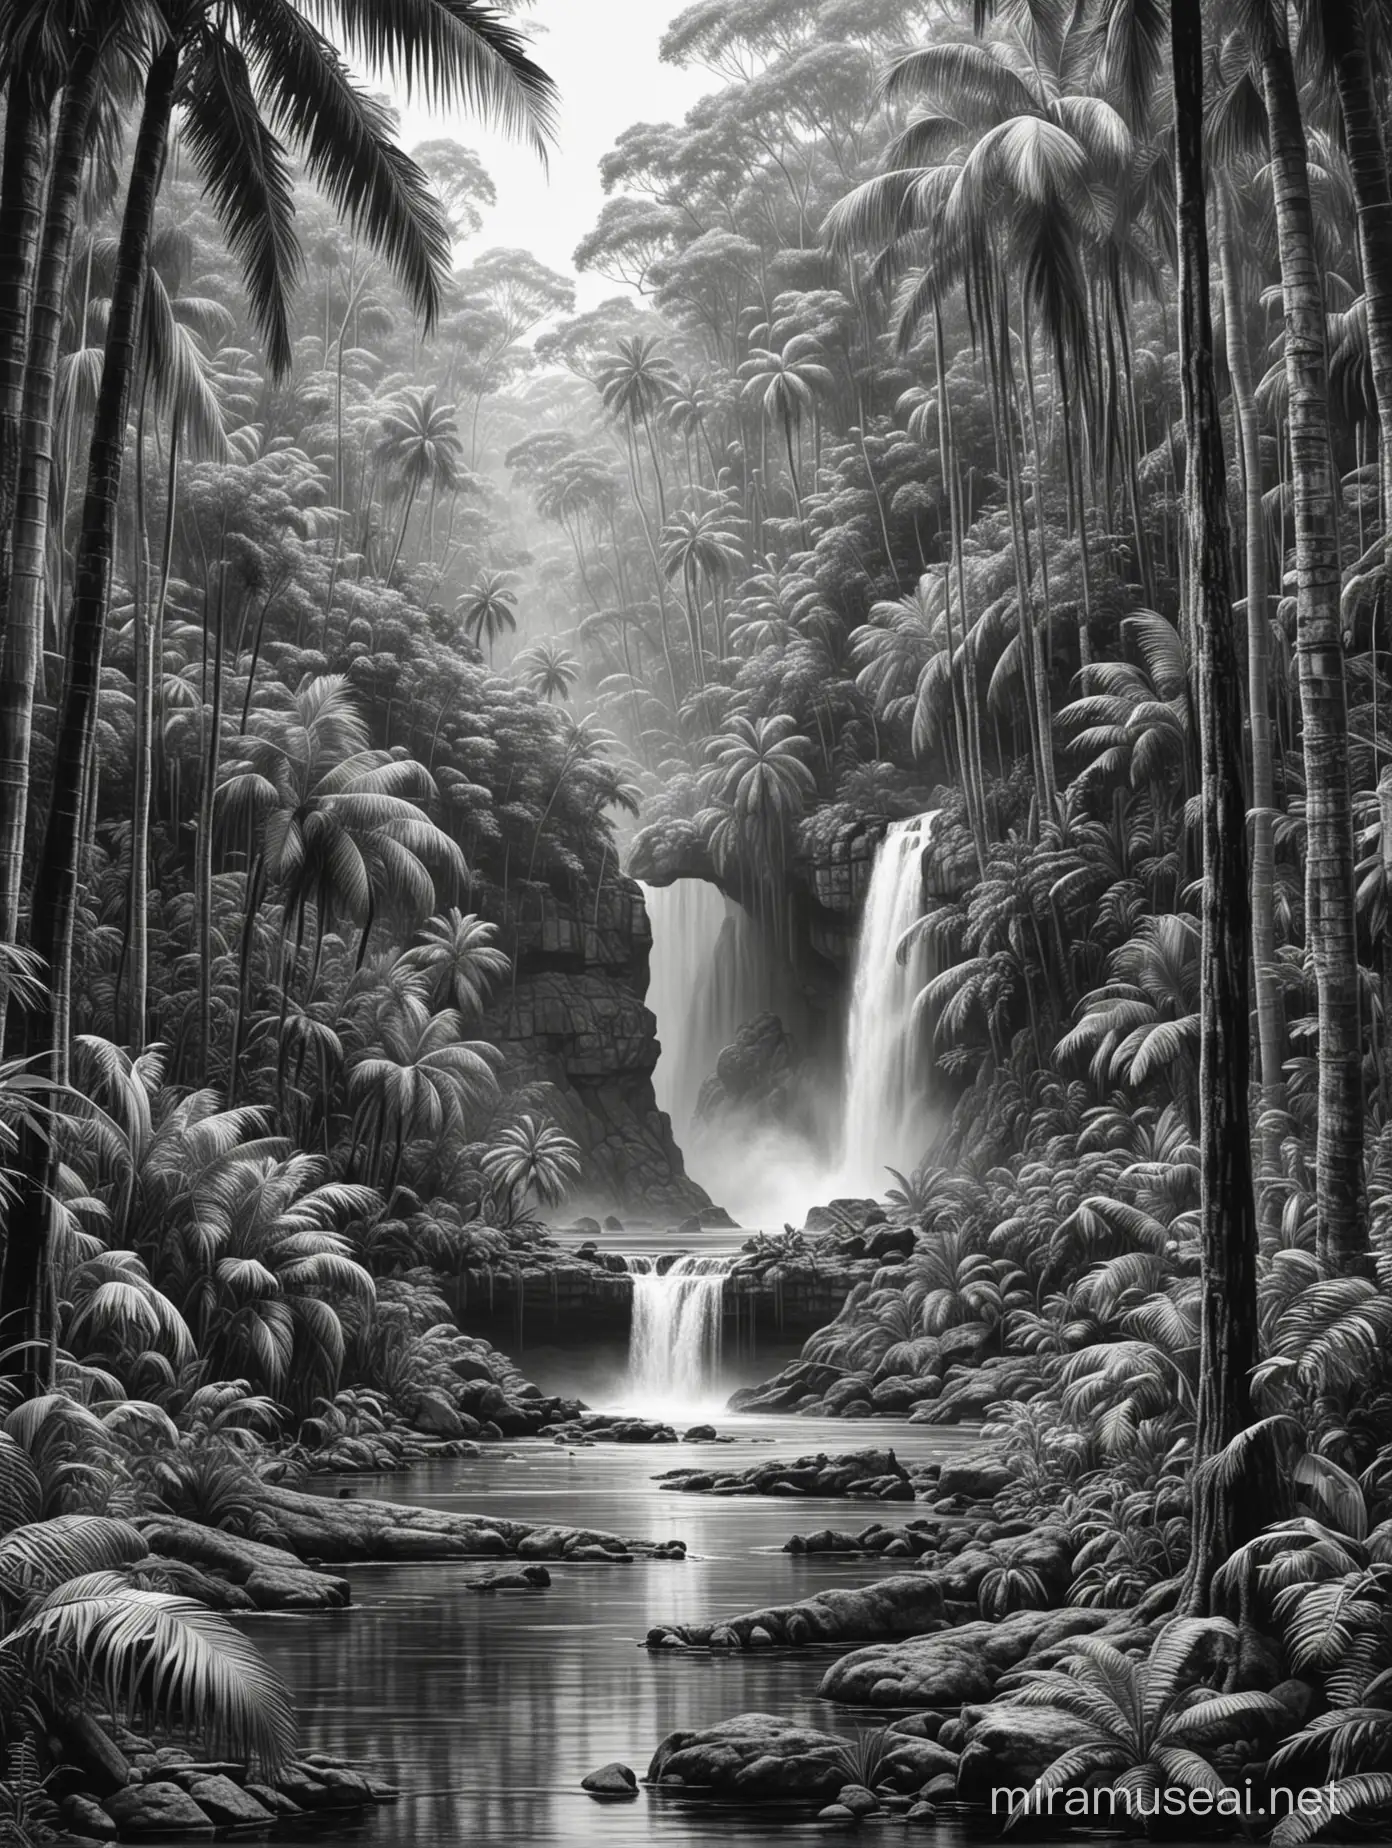 australian far north queensland rainforest landscape realistik HD detailed drawing black and white with waterfall and green trees only crocodile in background, bright green trees, highlighted green trees palm tree